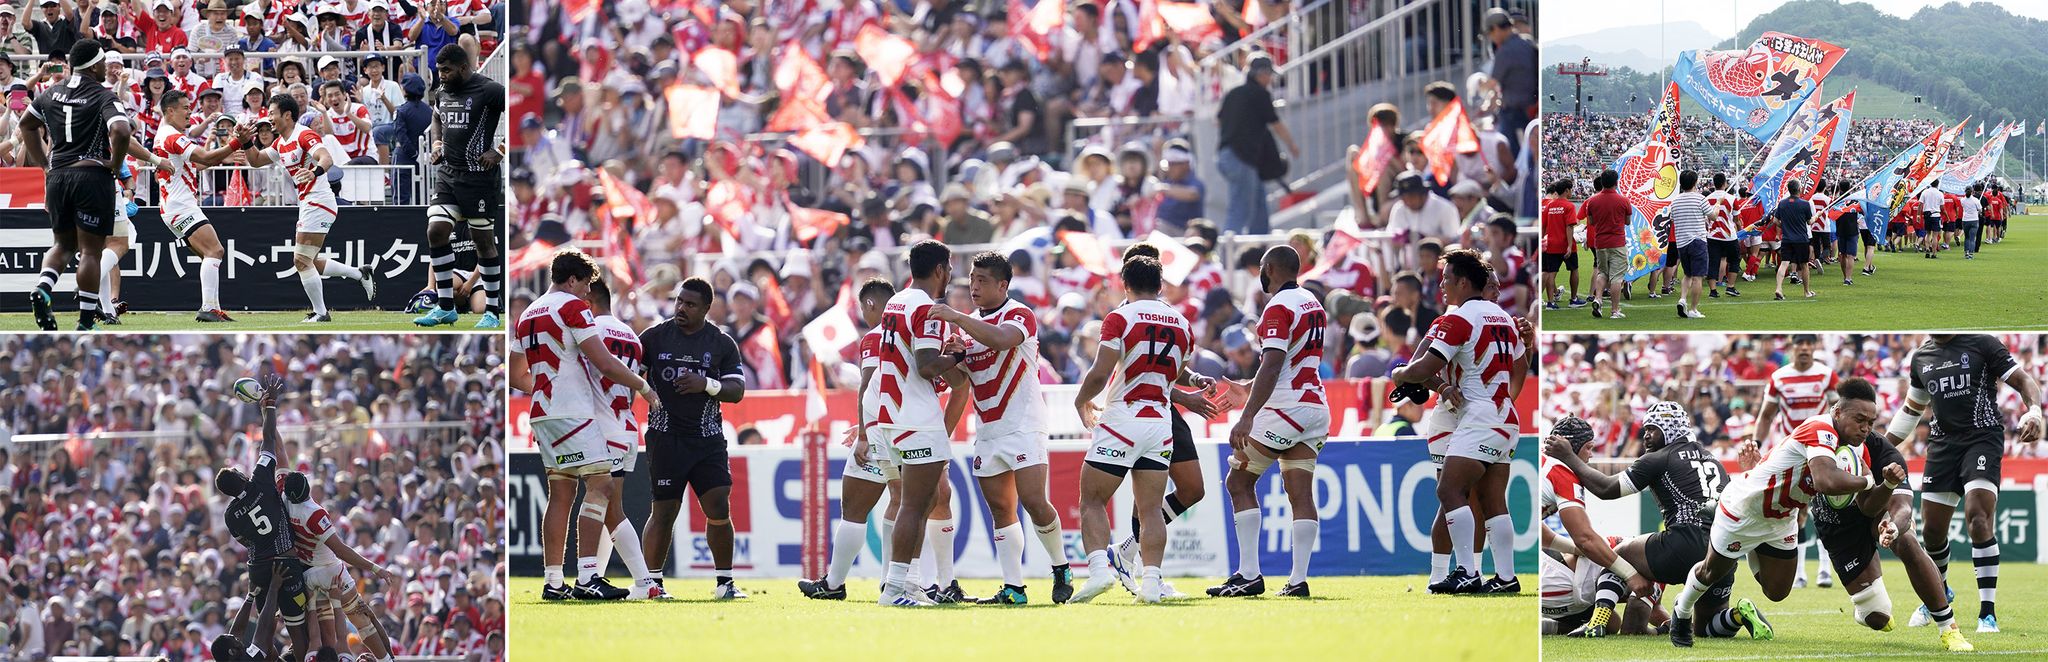 Japan v Fiji - Pacific Nations Cup